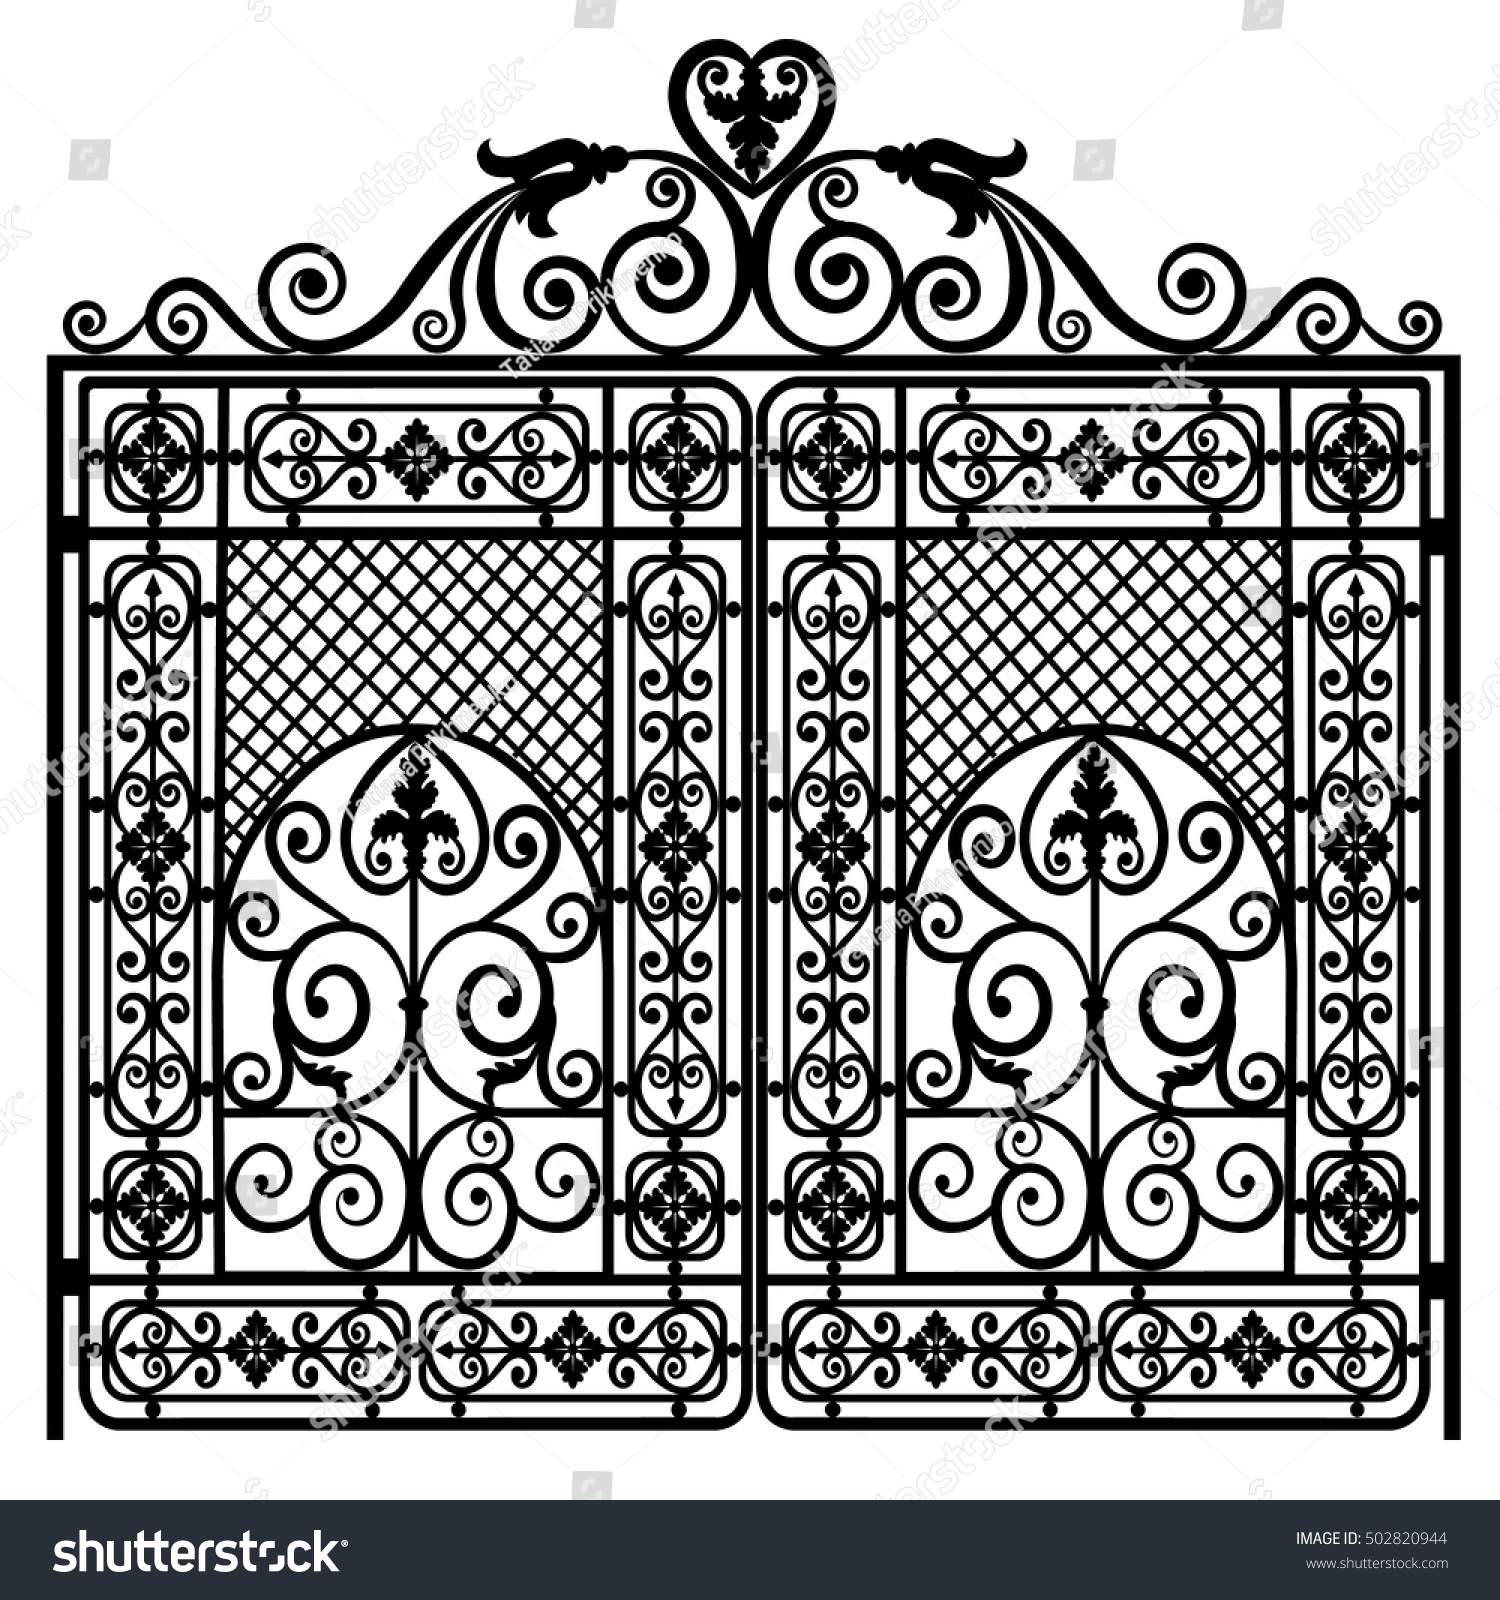 Black Metal Gate Forged Ornaments On Stock Vector 502820944 ...